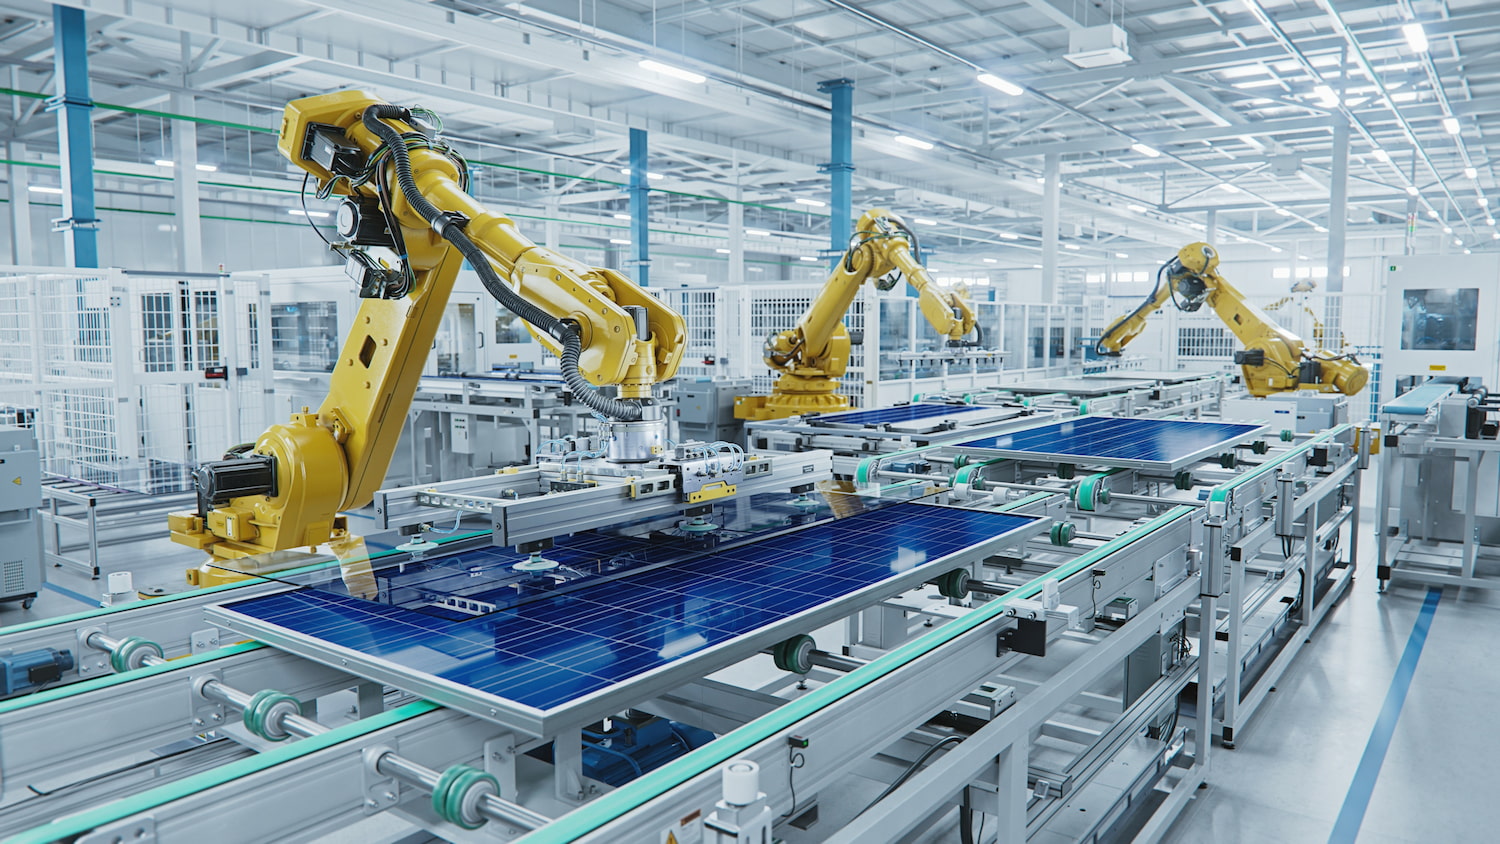 Robotic arms assembling solar panels, highlighting efficiency in automated manufacturing